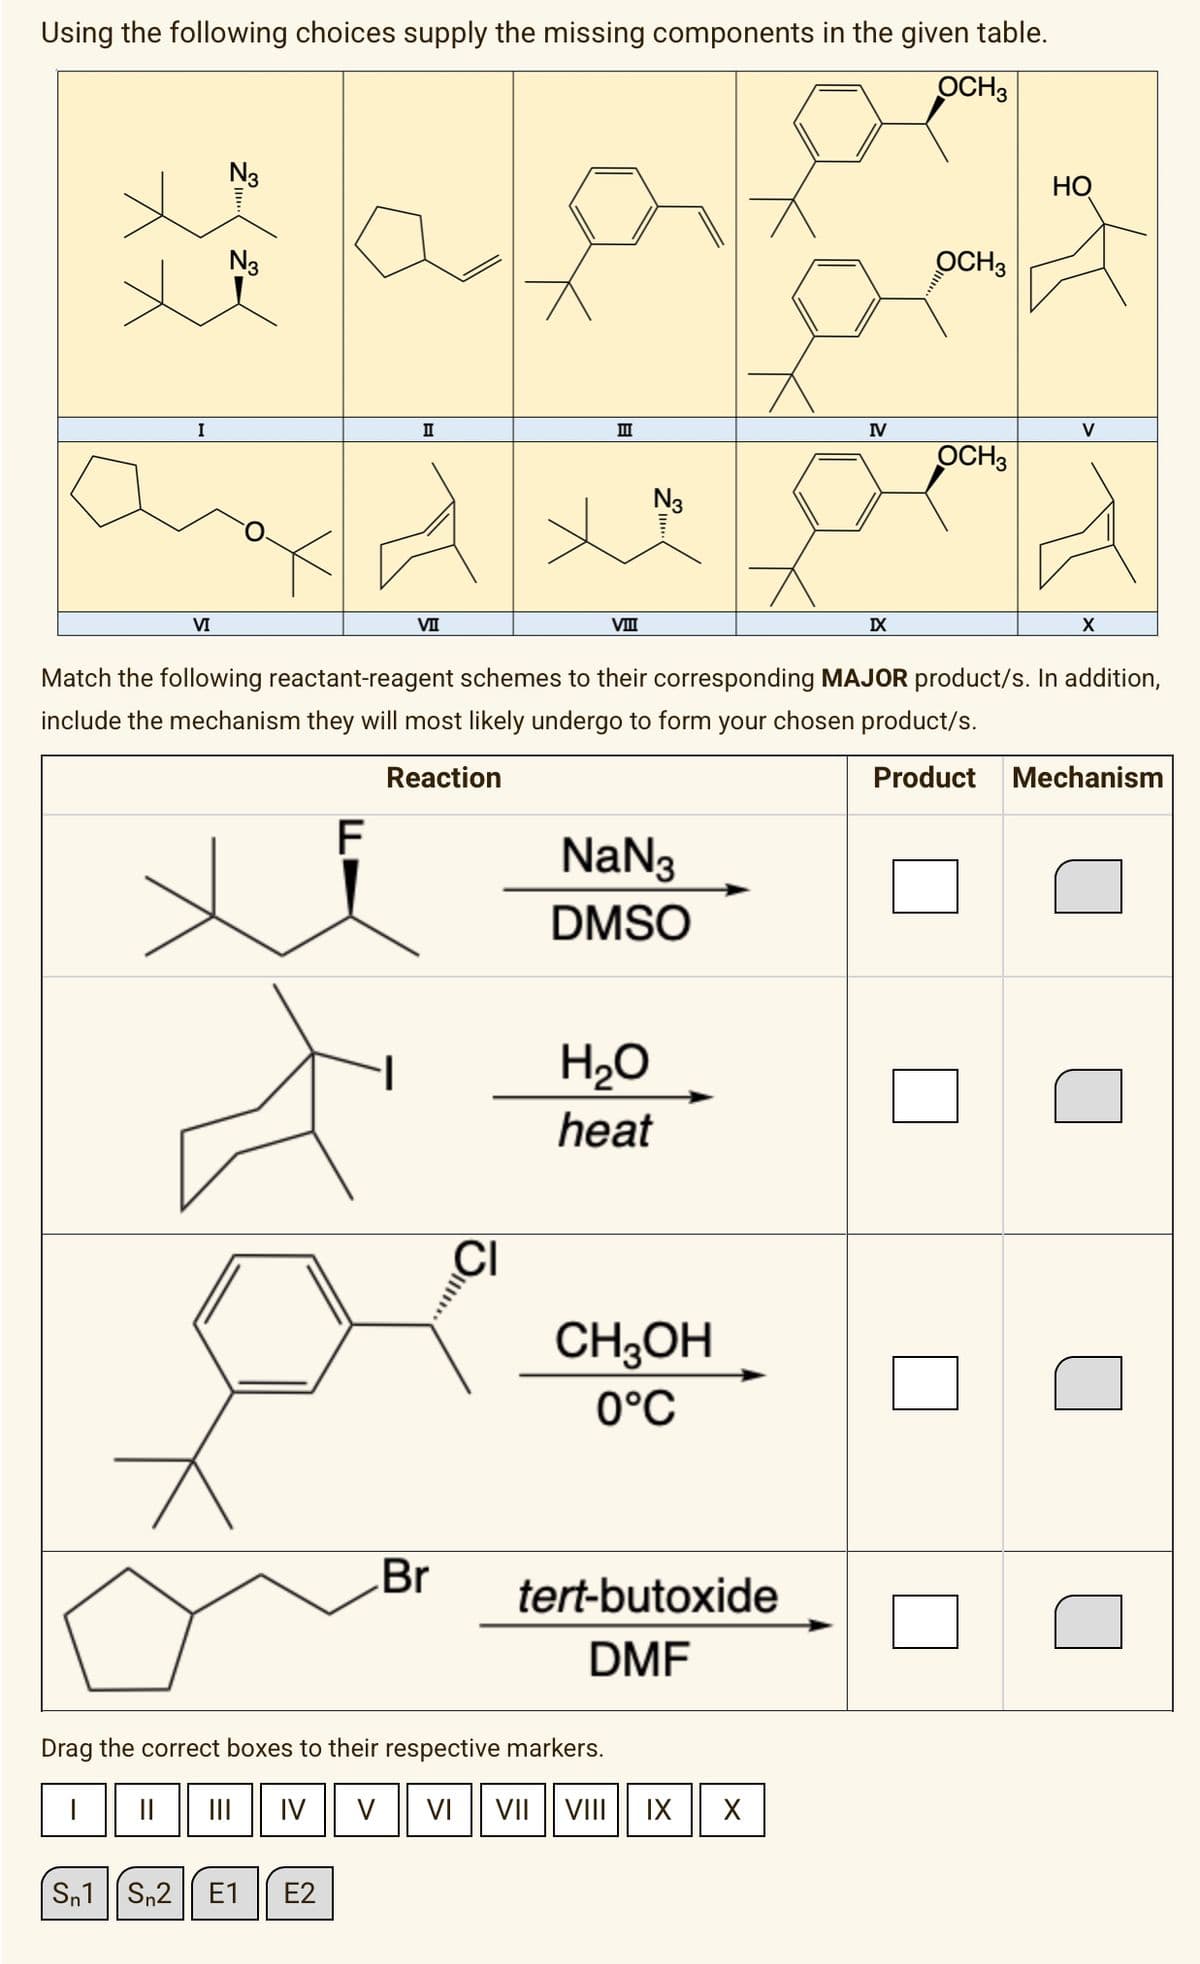 Using the following choices supply the missing components in the given table.
OCH3
I
N3
VI
N3
aad
II
F
VII
Sn1 S₂2 E1 E2
Br
CI
IIII
N3
NaN3
DMSO
H₂O
heat
Drag the correct boxes to their respective markers.
Match the following reactant-reagent schemes to their corresponding MAJOR product/s. In addition,
include the mechanism they will most likely undergo to form your chosen product/s.
Reaction
Product Mechanism
CH3OH
0°C
tert-butoxide
DMF
||| IV V VI VII VIII IX X
IV
IX
OCH 3
OCH 3
HO
V
X